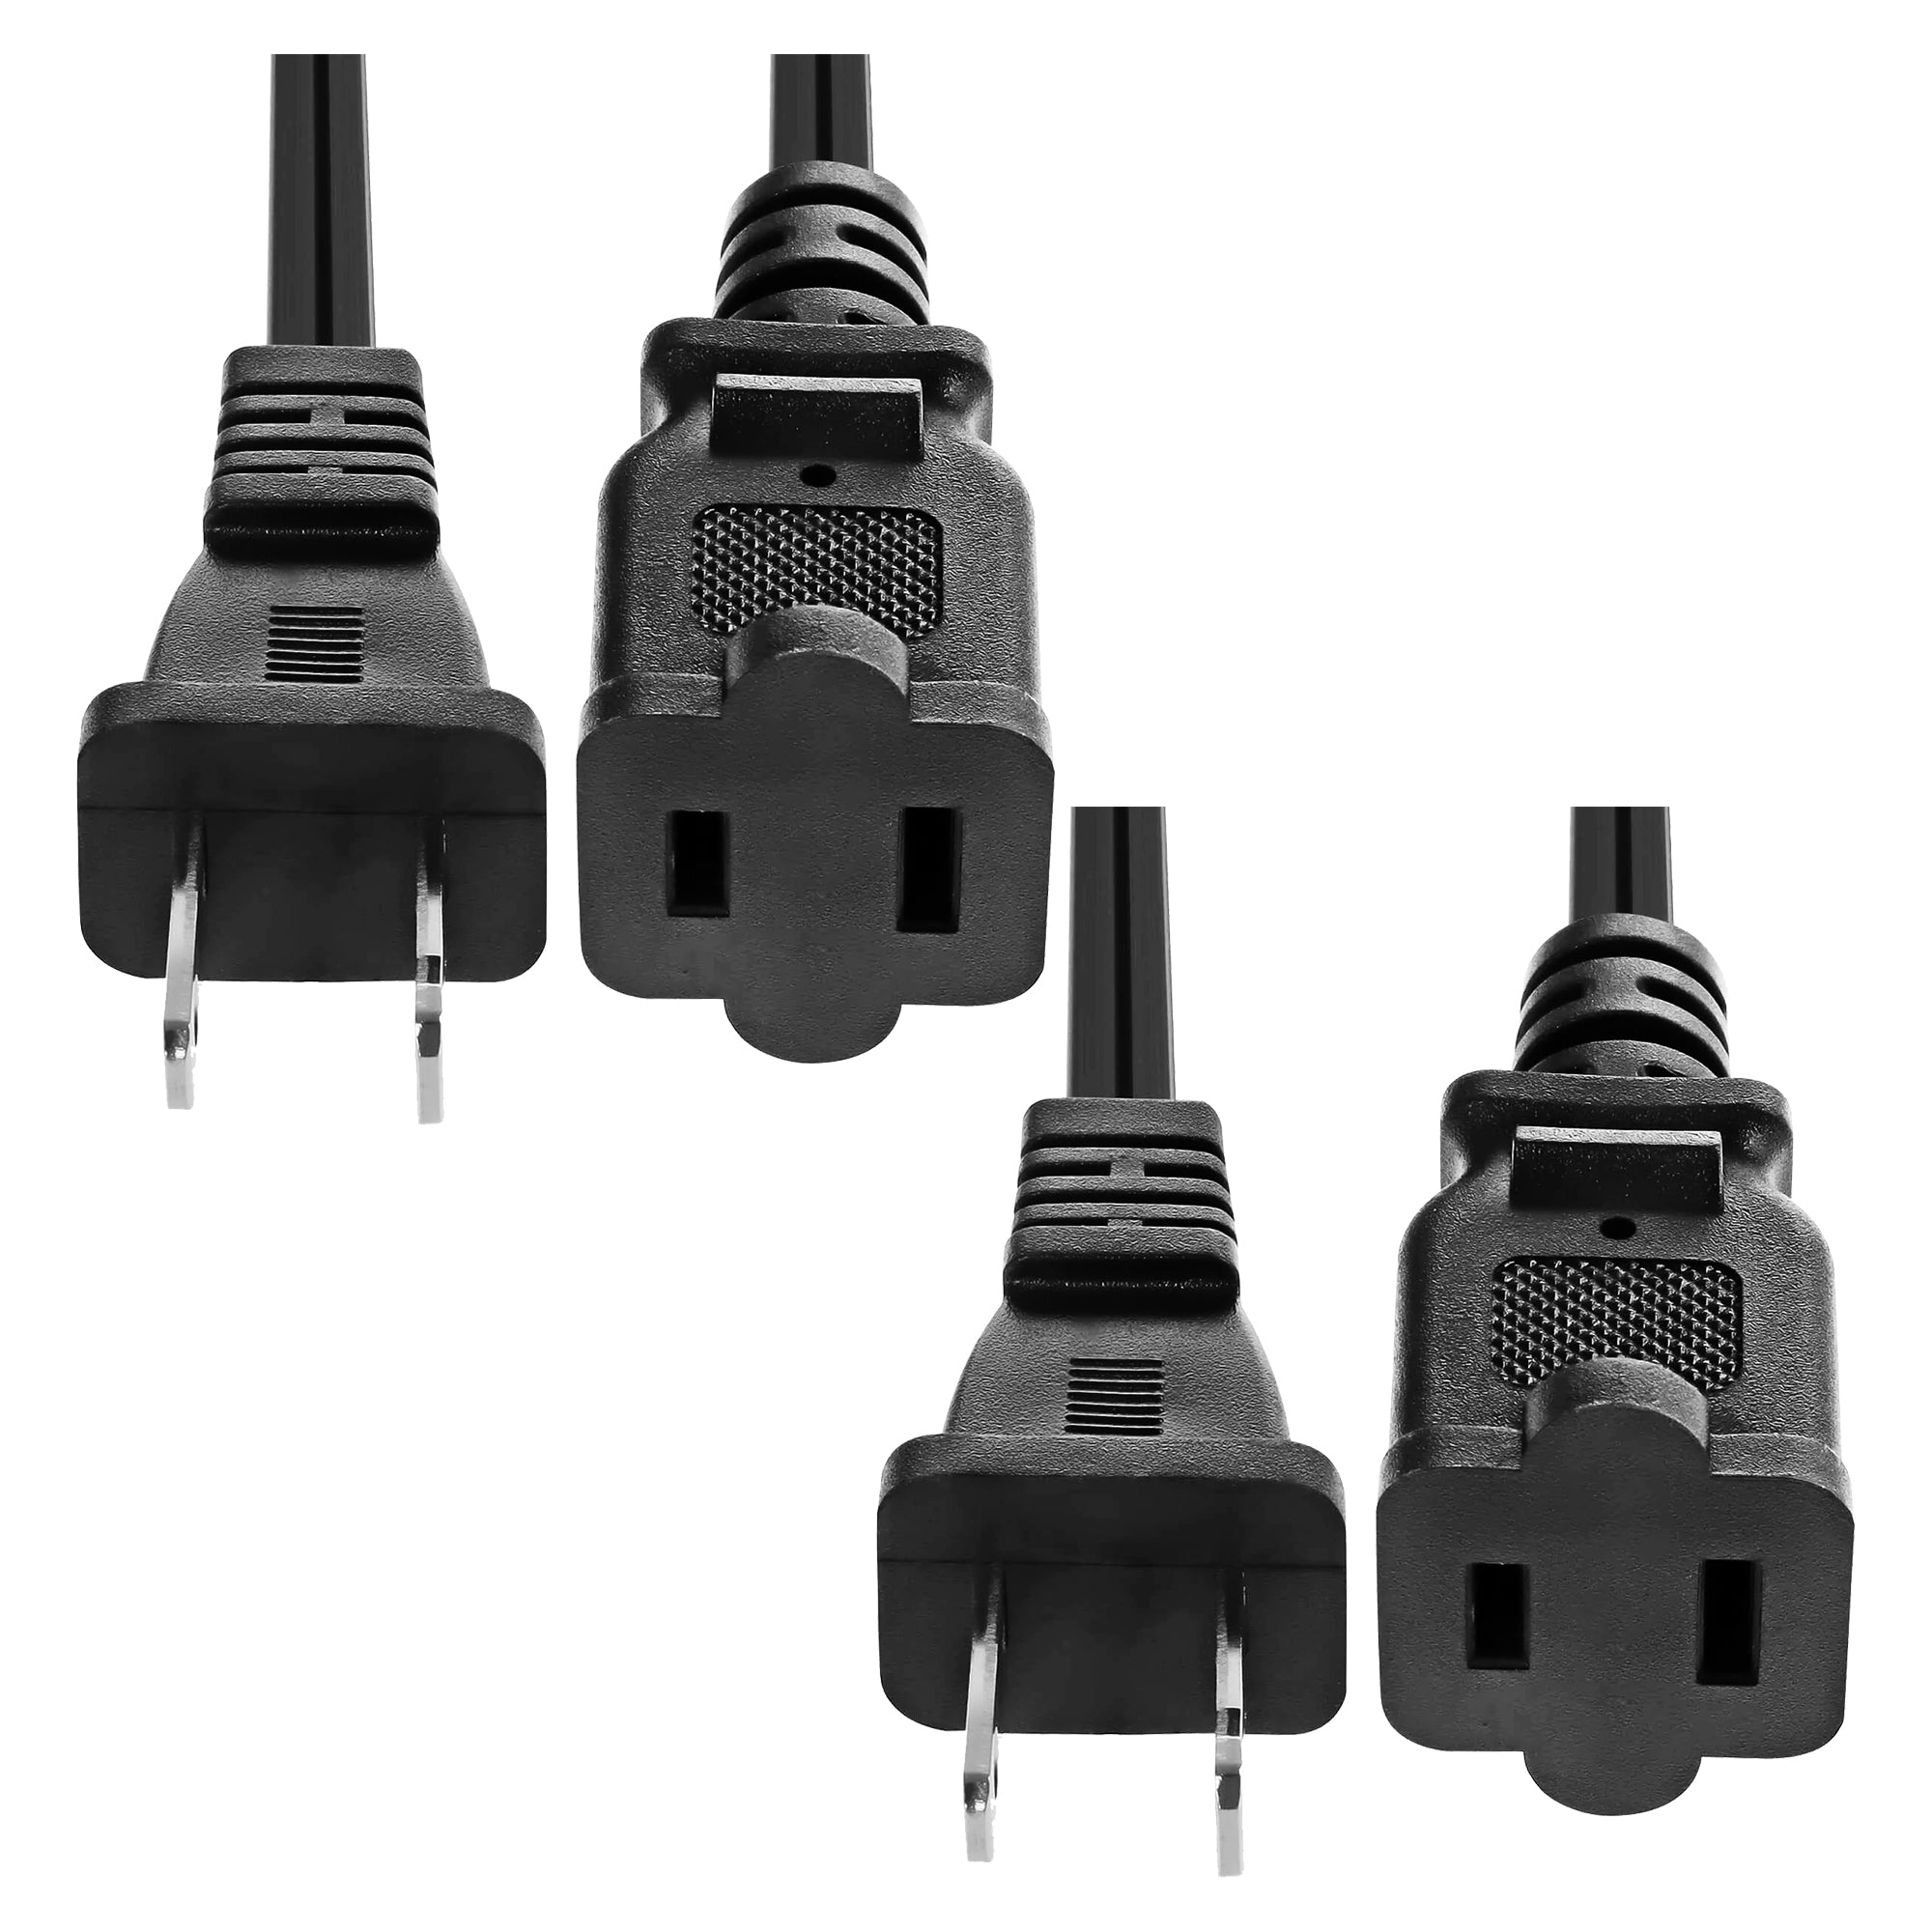 5 Core 2 Pack AC Power Cord 10 Ft US Polarized Male to Female 2 Prong Extension Cords Adapter 16AWG/2C 125V 13A